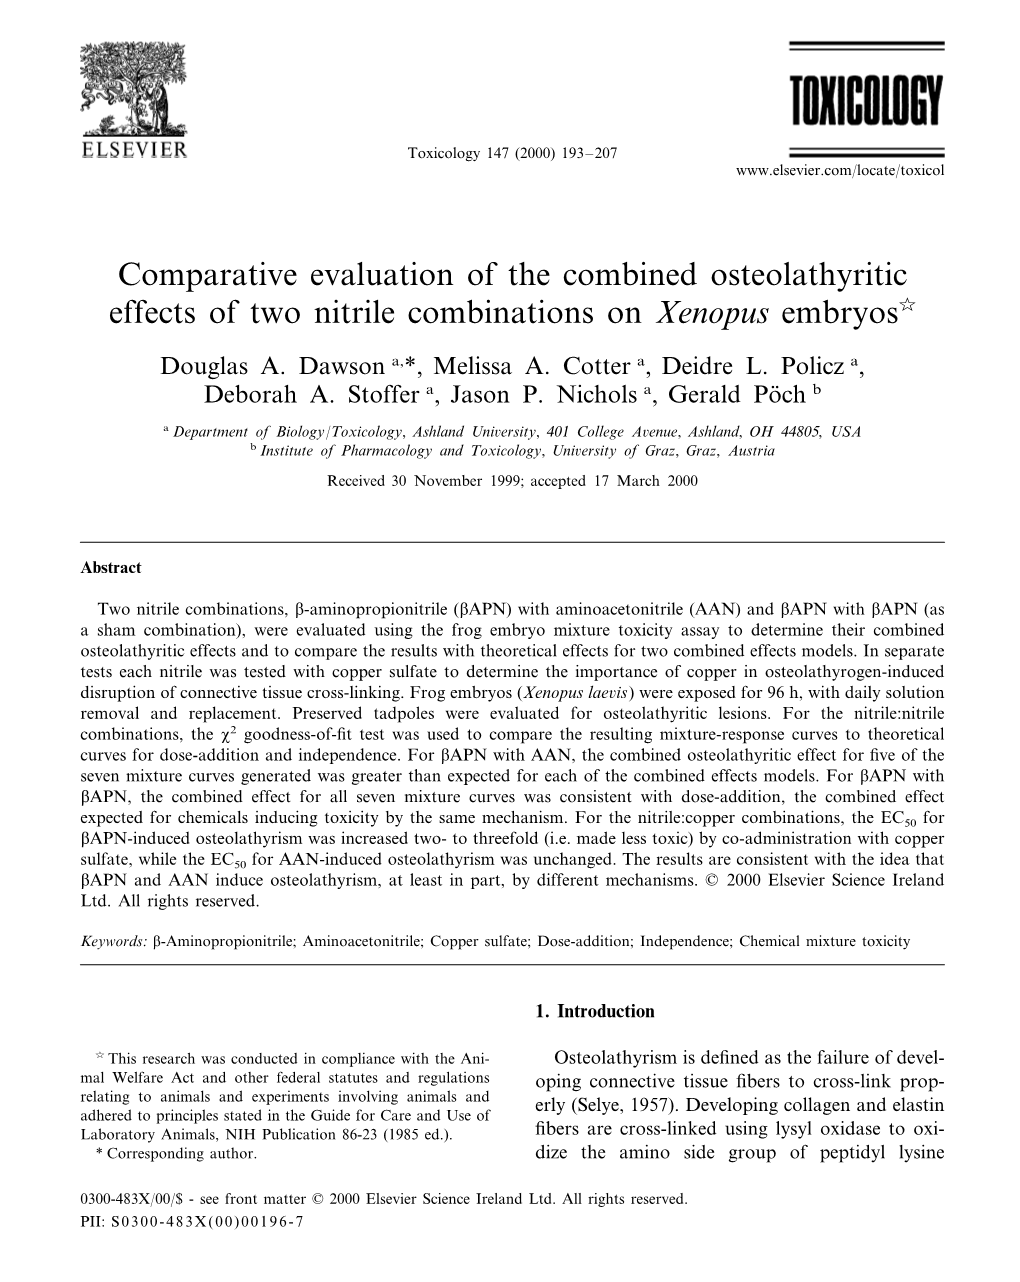 Comparative Evaluation of the Combined Osteolathyritic Effects of Two Nitrile Combinations on Xenopus Embryos